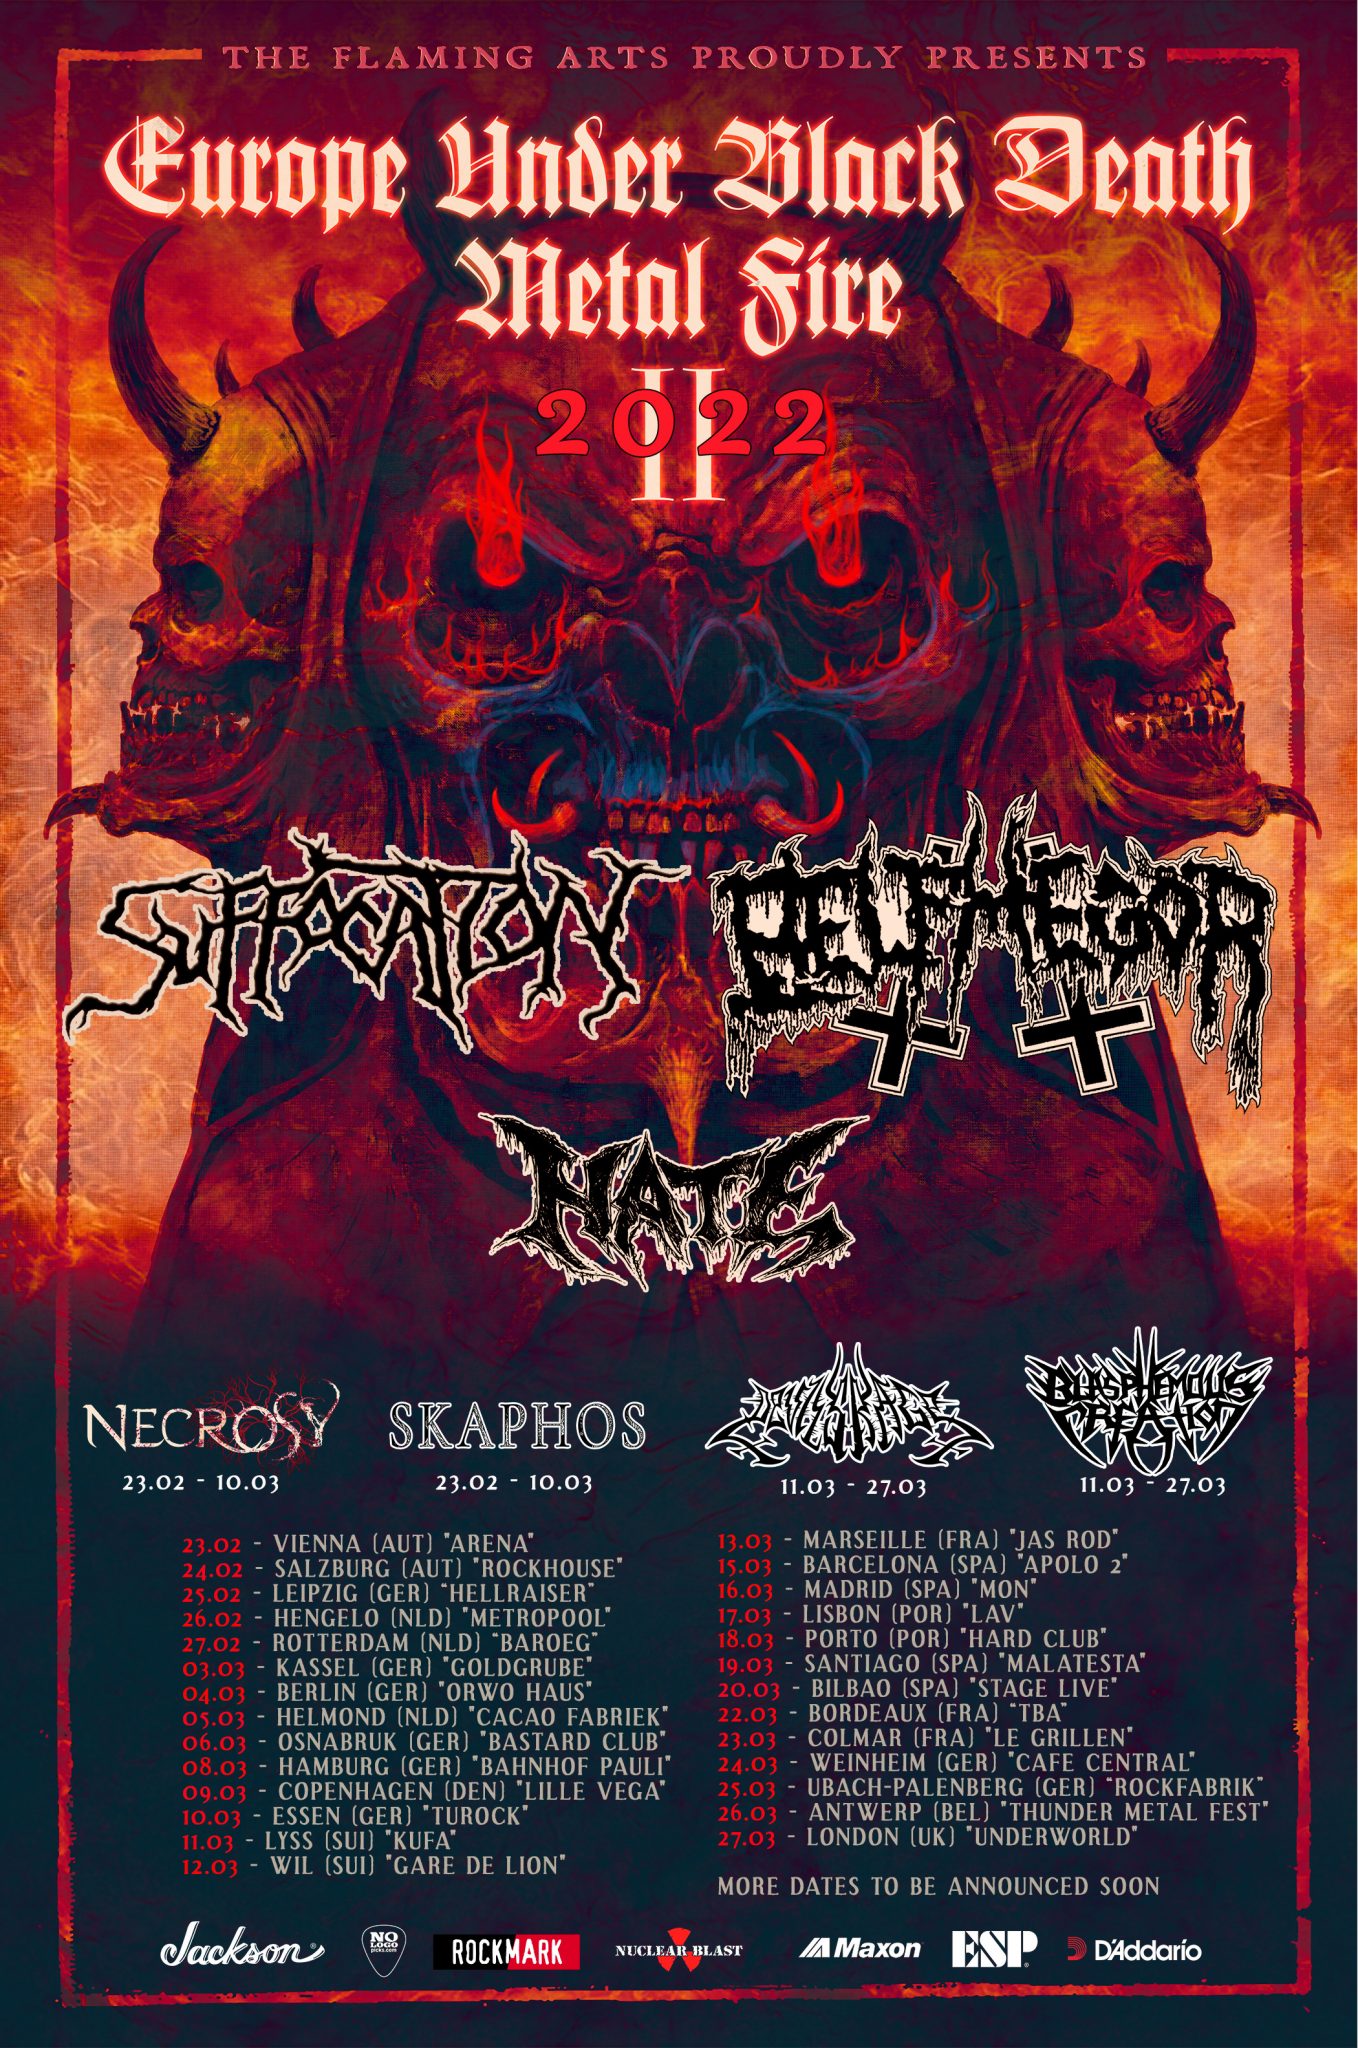 SUFFOCATION & BELPHEGOR ANNOUNCE NEW DATE FOR LONDON SHOW 'EUROPE UNDER